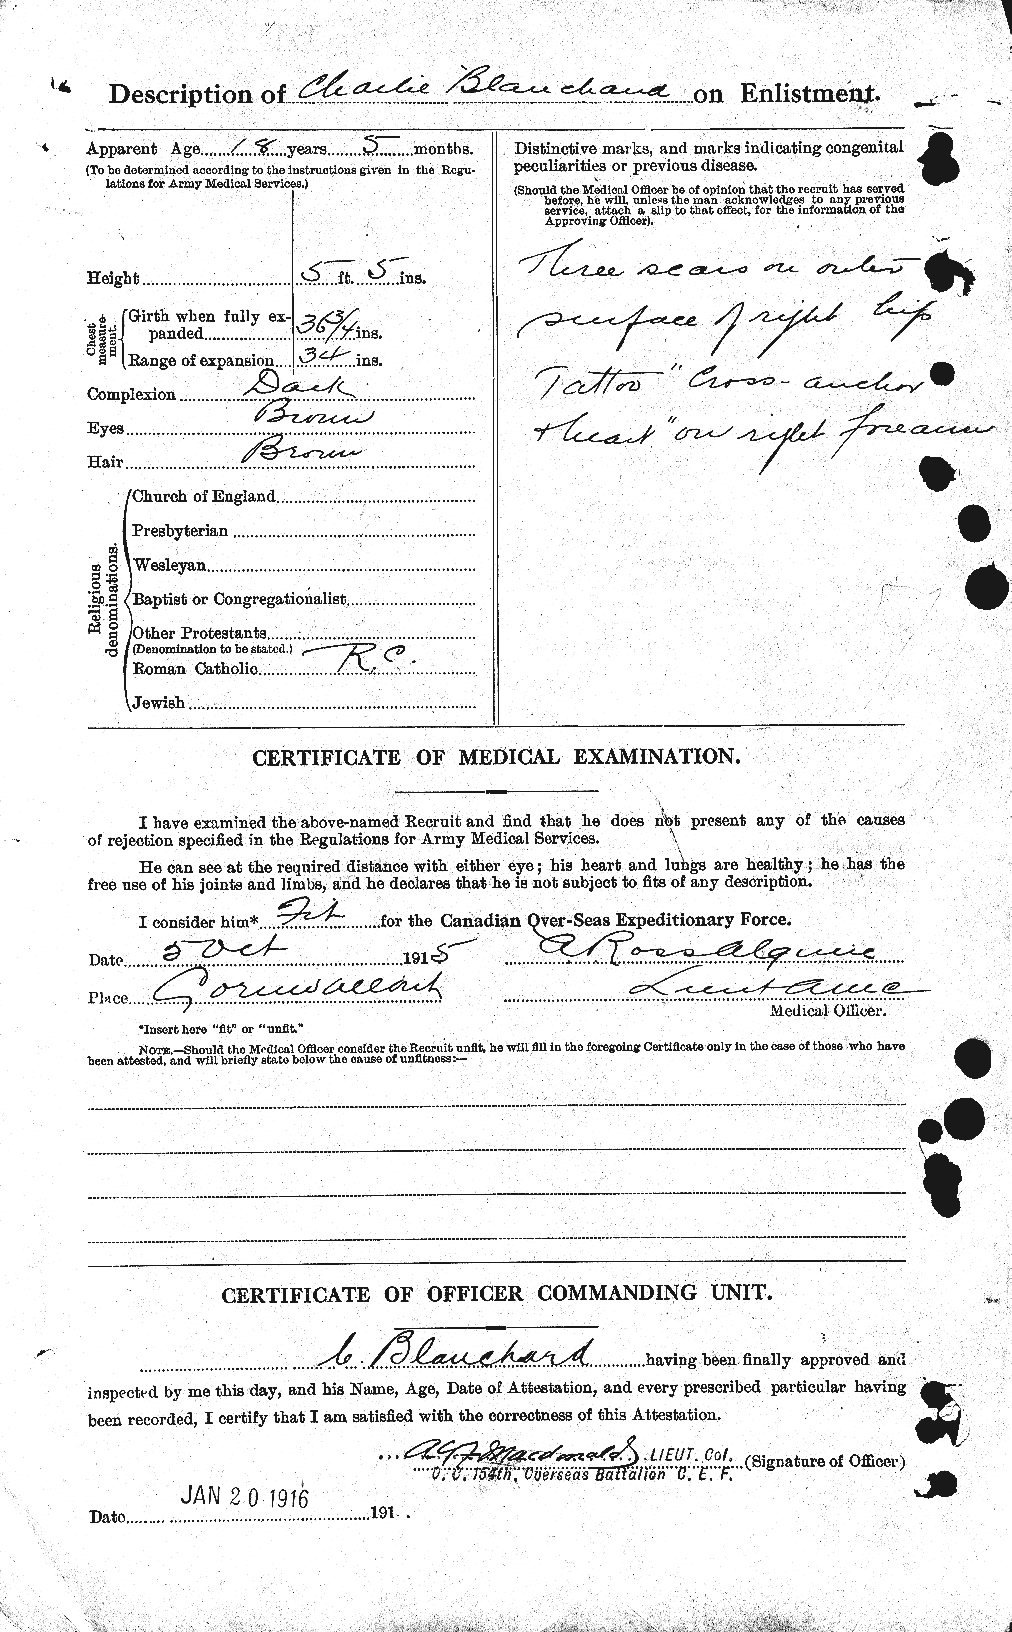 Personnel Records of the First World War - CEF 240358b